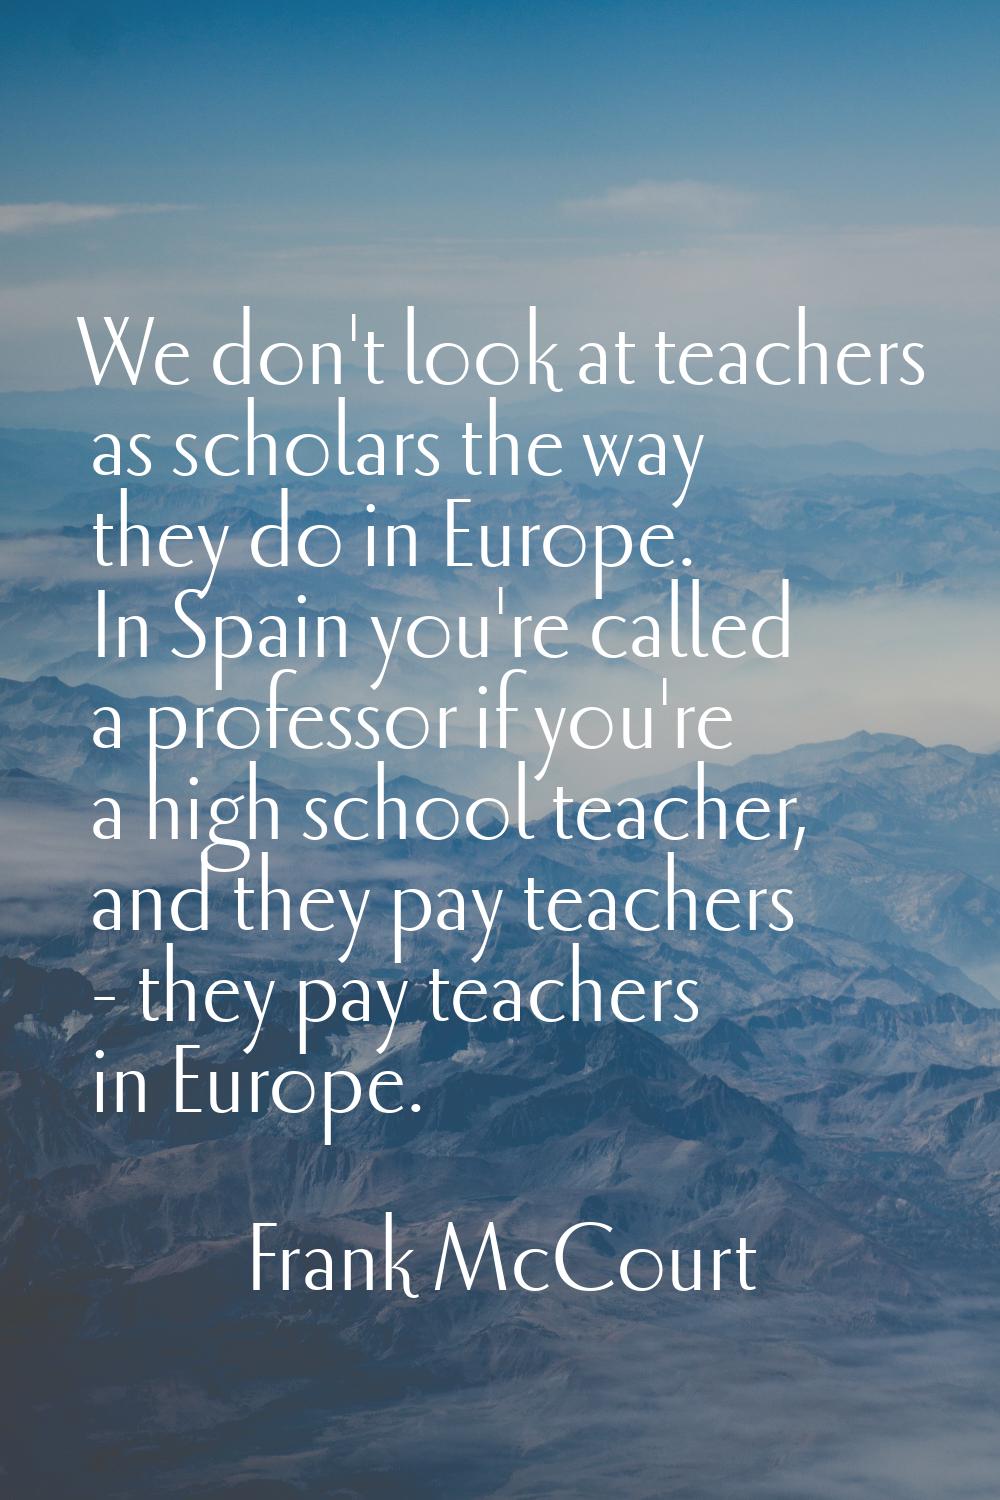 We don't look at teachers as scholars the way they do in Europe. In Spain you're called a professor